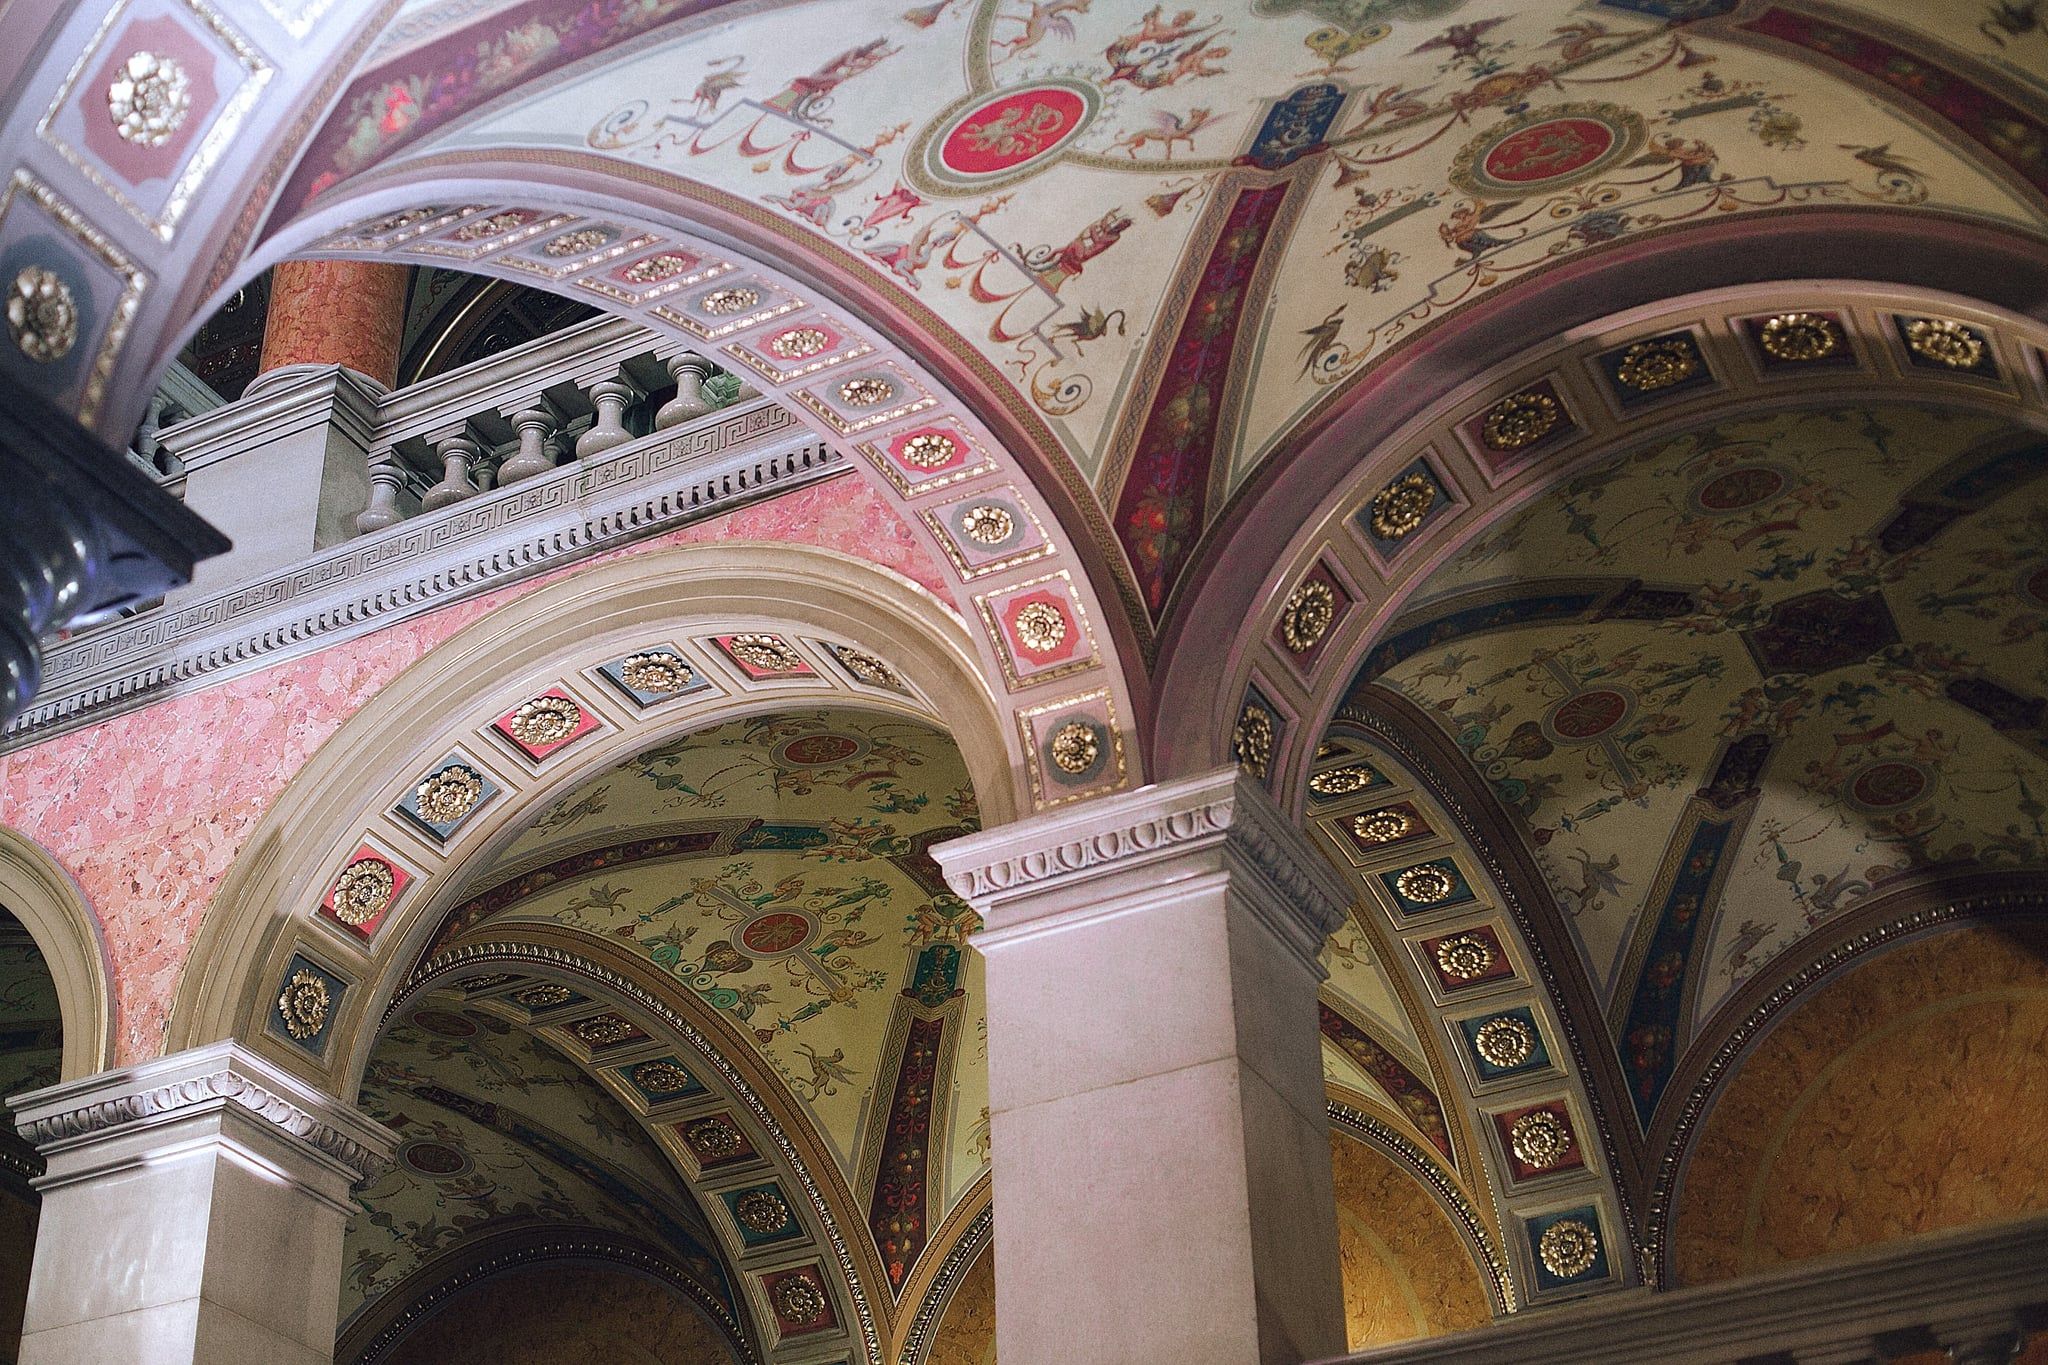 A view of the ceiling and columns of the Library of Congress. - Royalcore